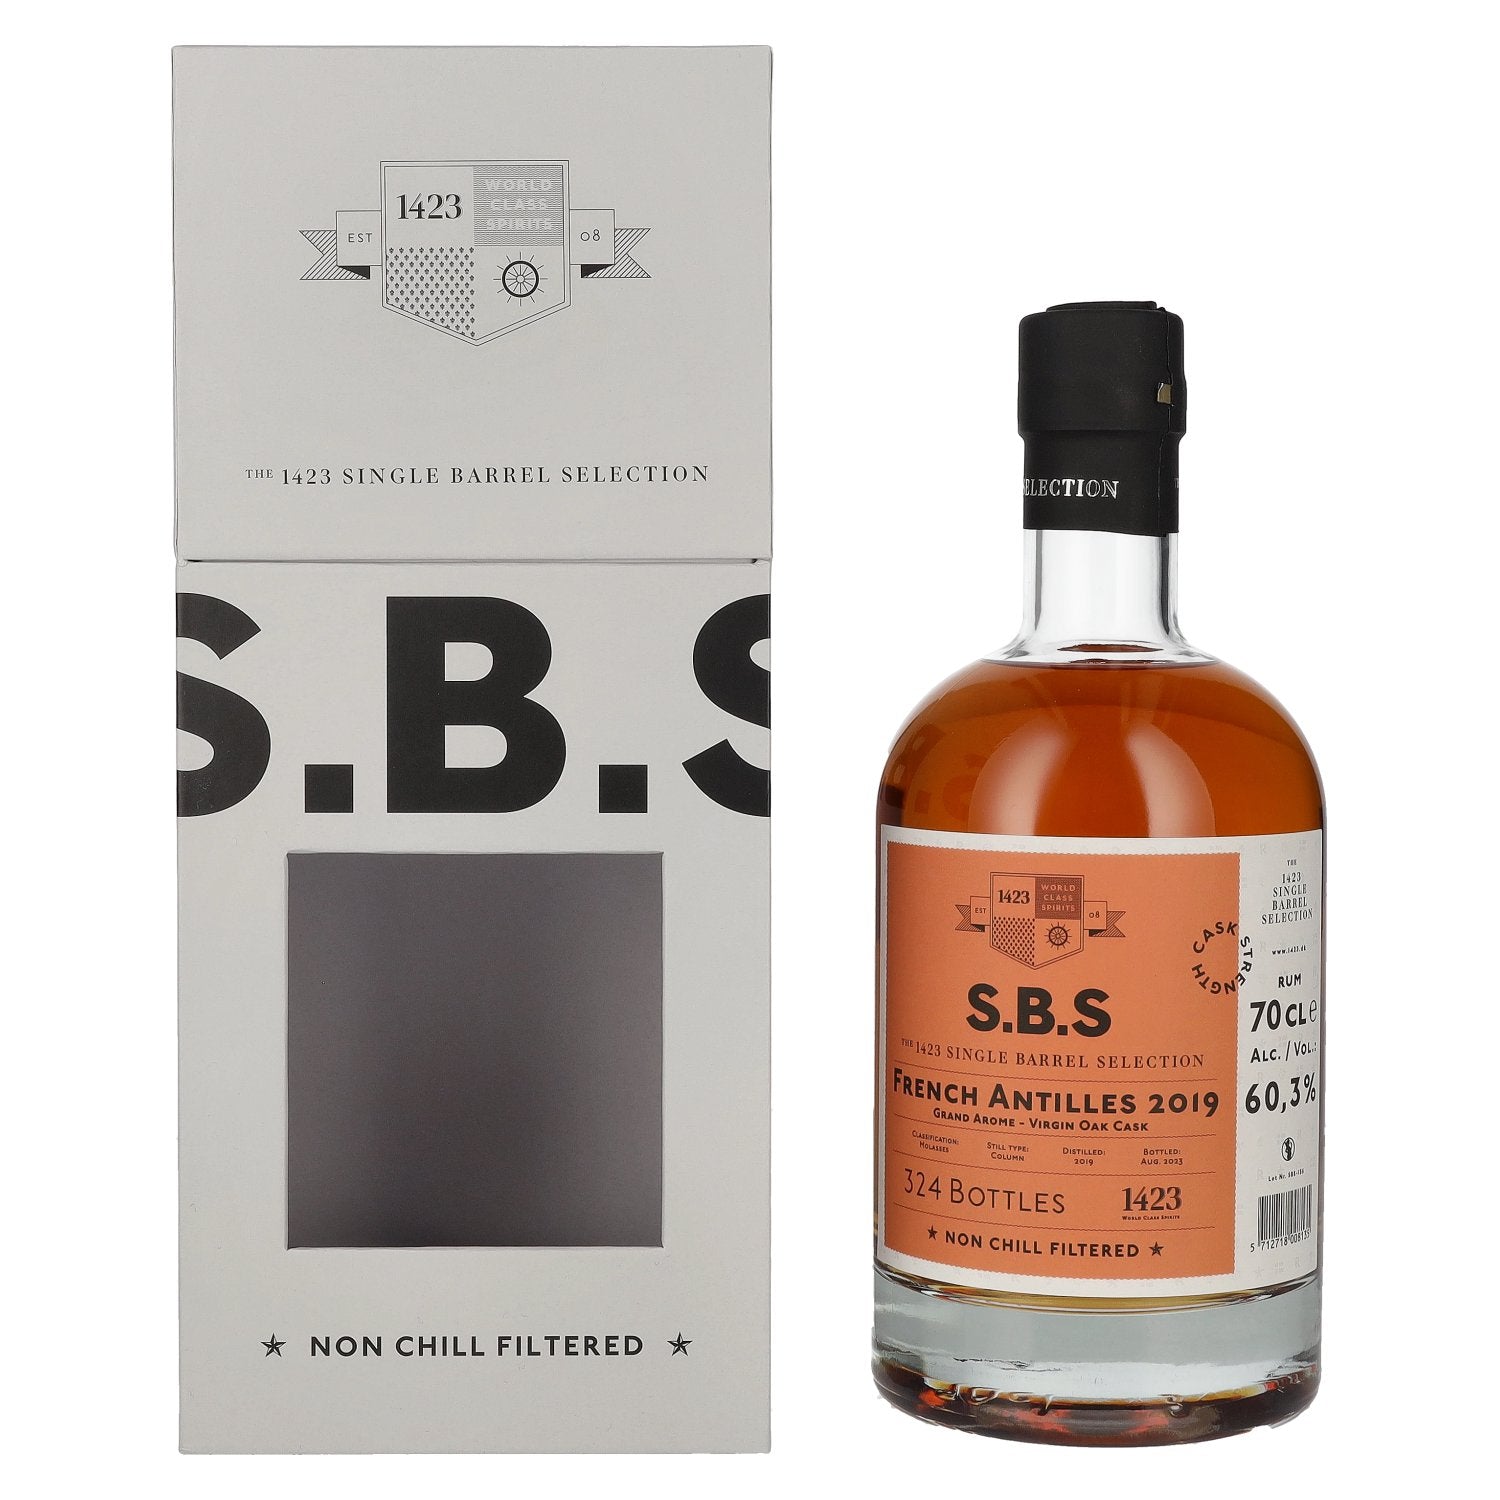 1423 S.B.S FRENCH ANTILLES Single Barrel Selection 2019 60,3% Vol. 0,7l in Giftbox